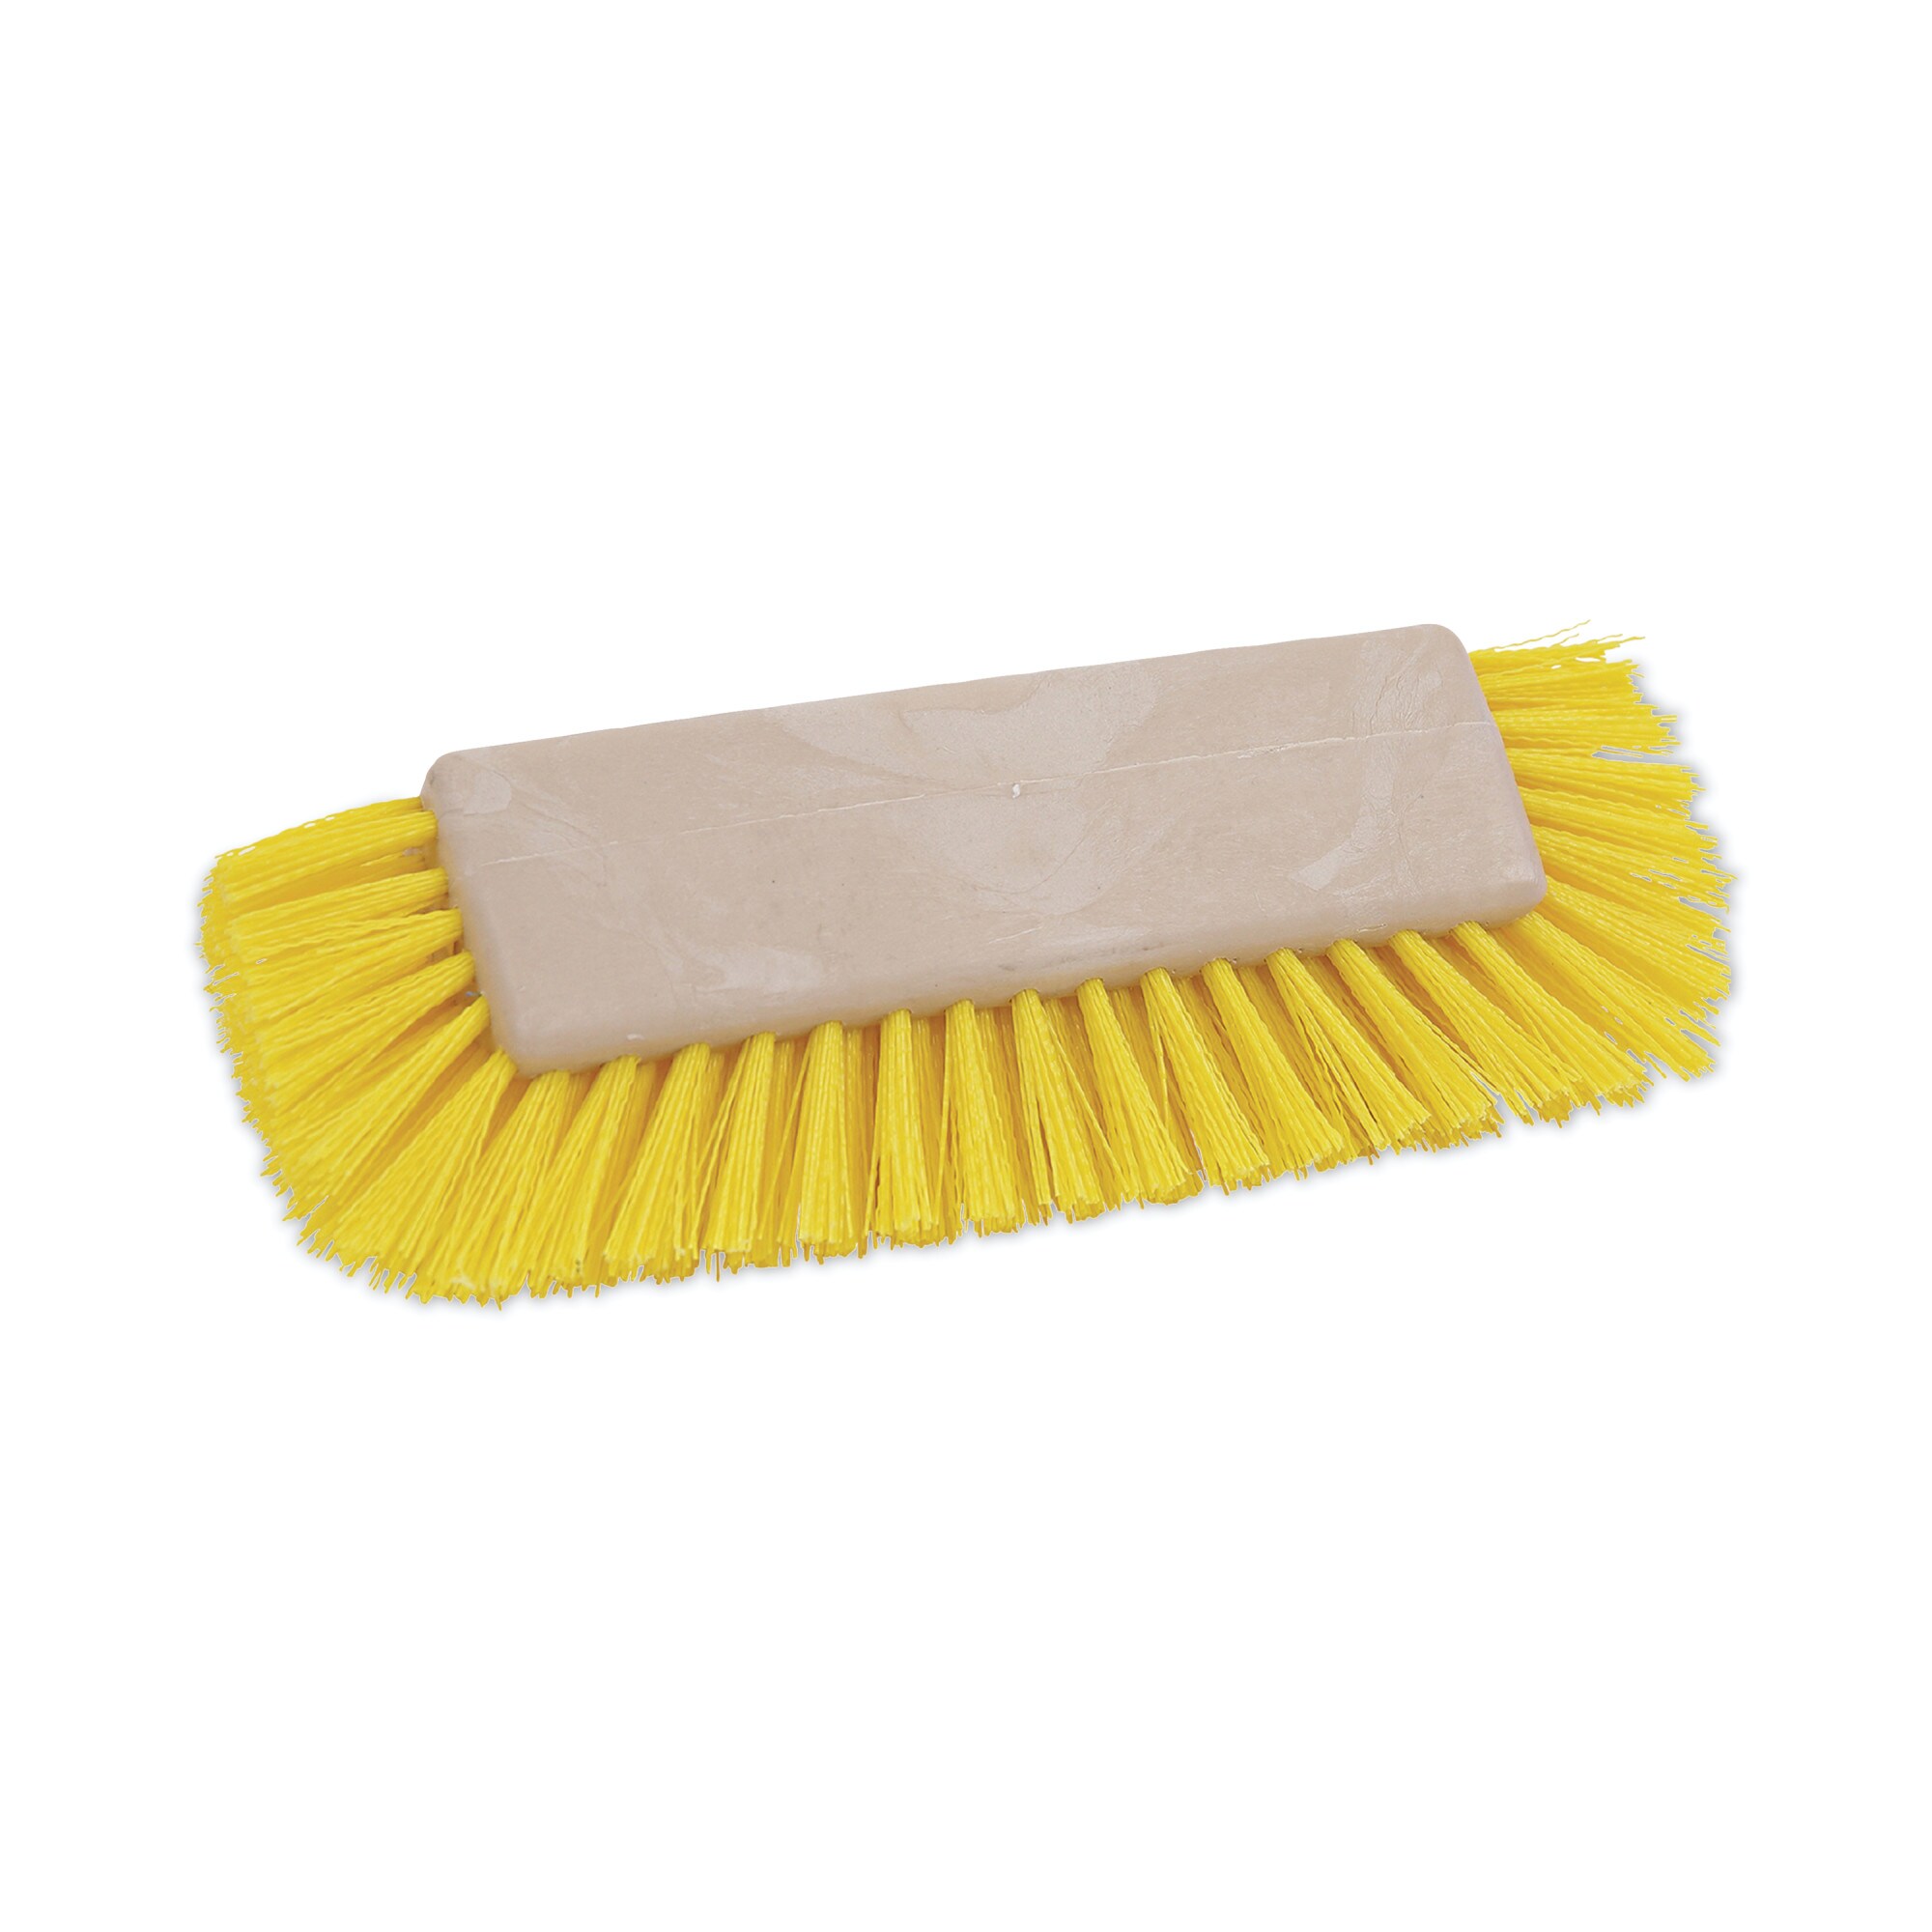 Rubbermaid Commercial Products Tile and Grout Brush, Yellow